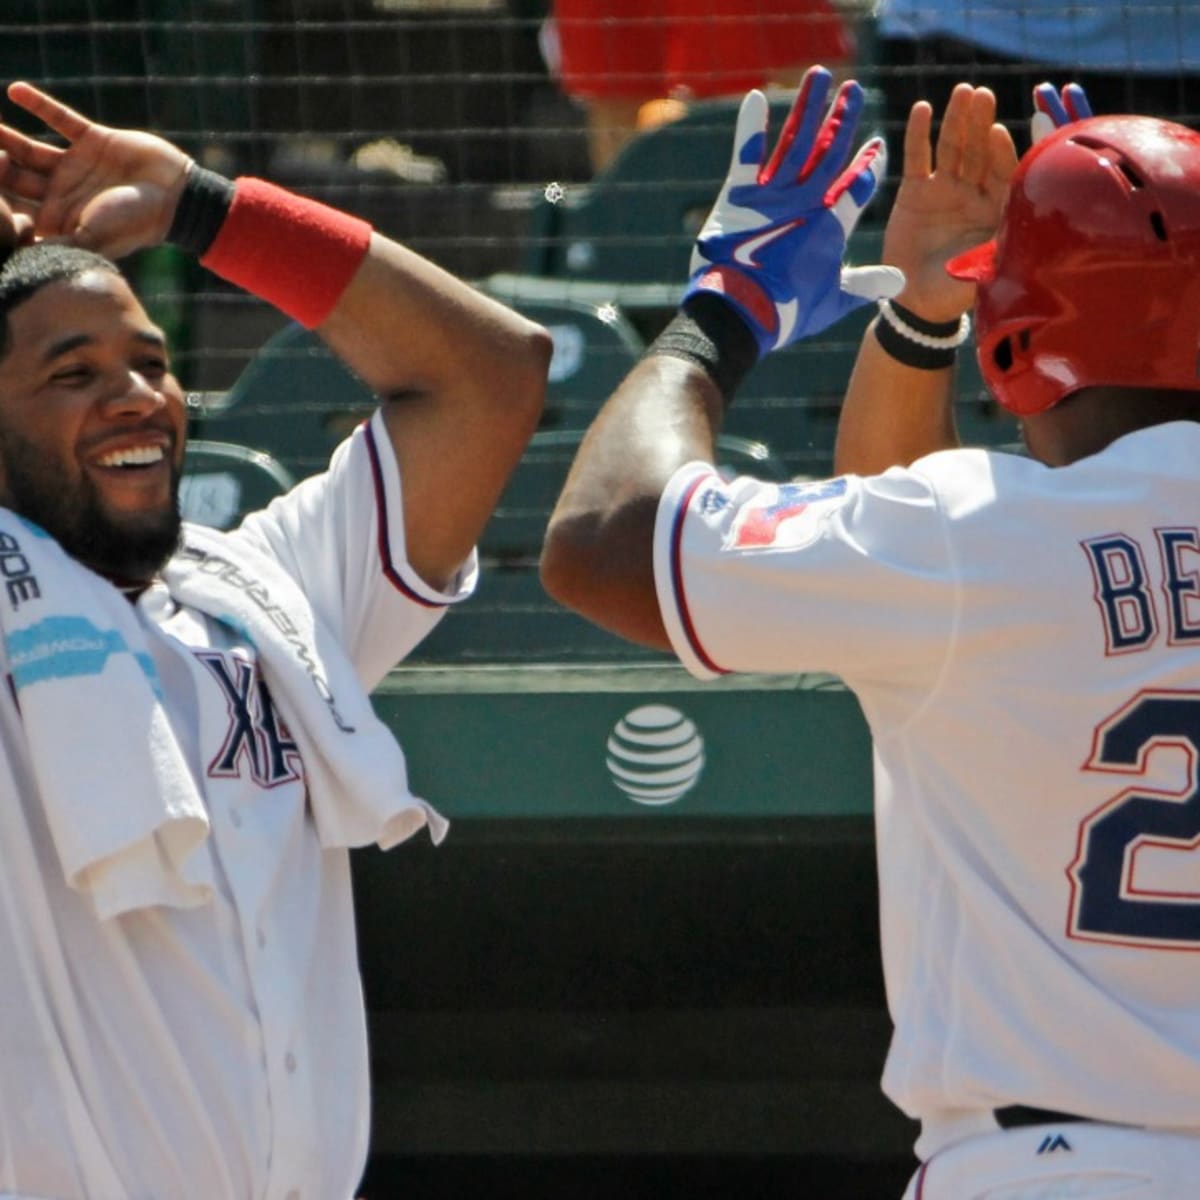 Adrian Beltre drives Rangers in pursuit of World Series ring - Sports  Illustrated